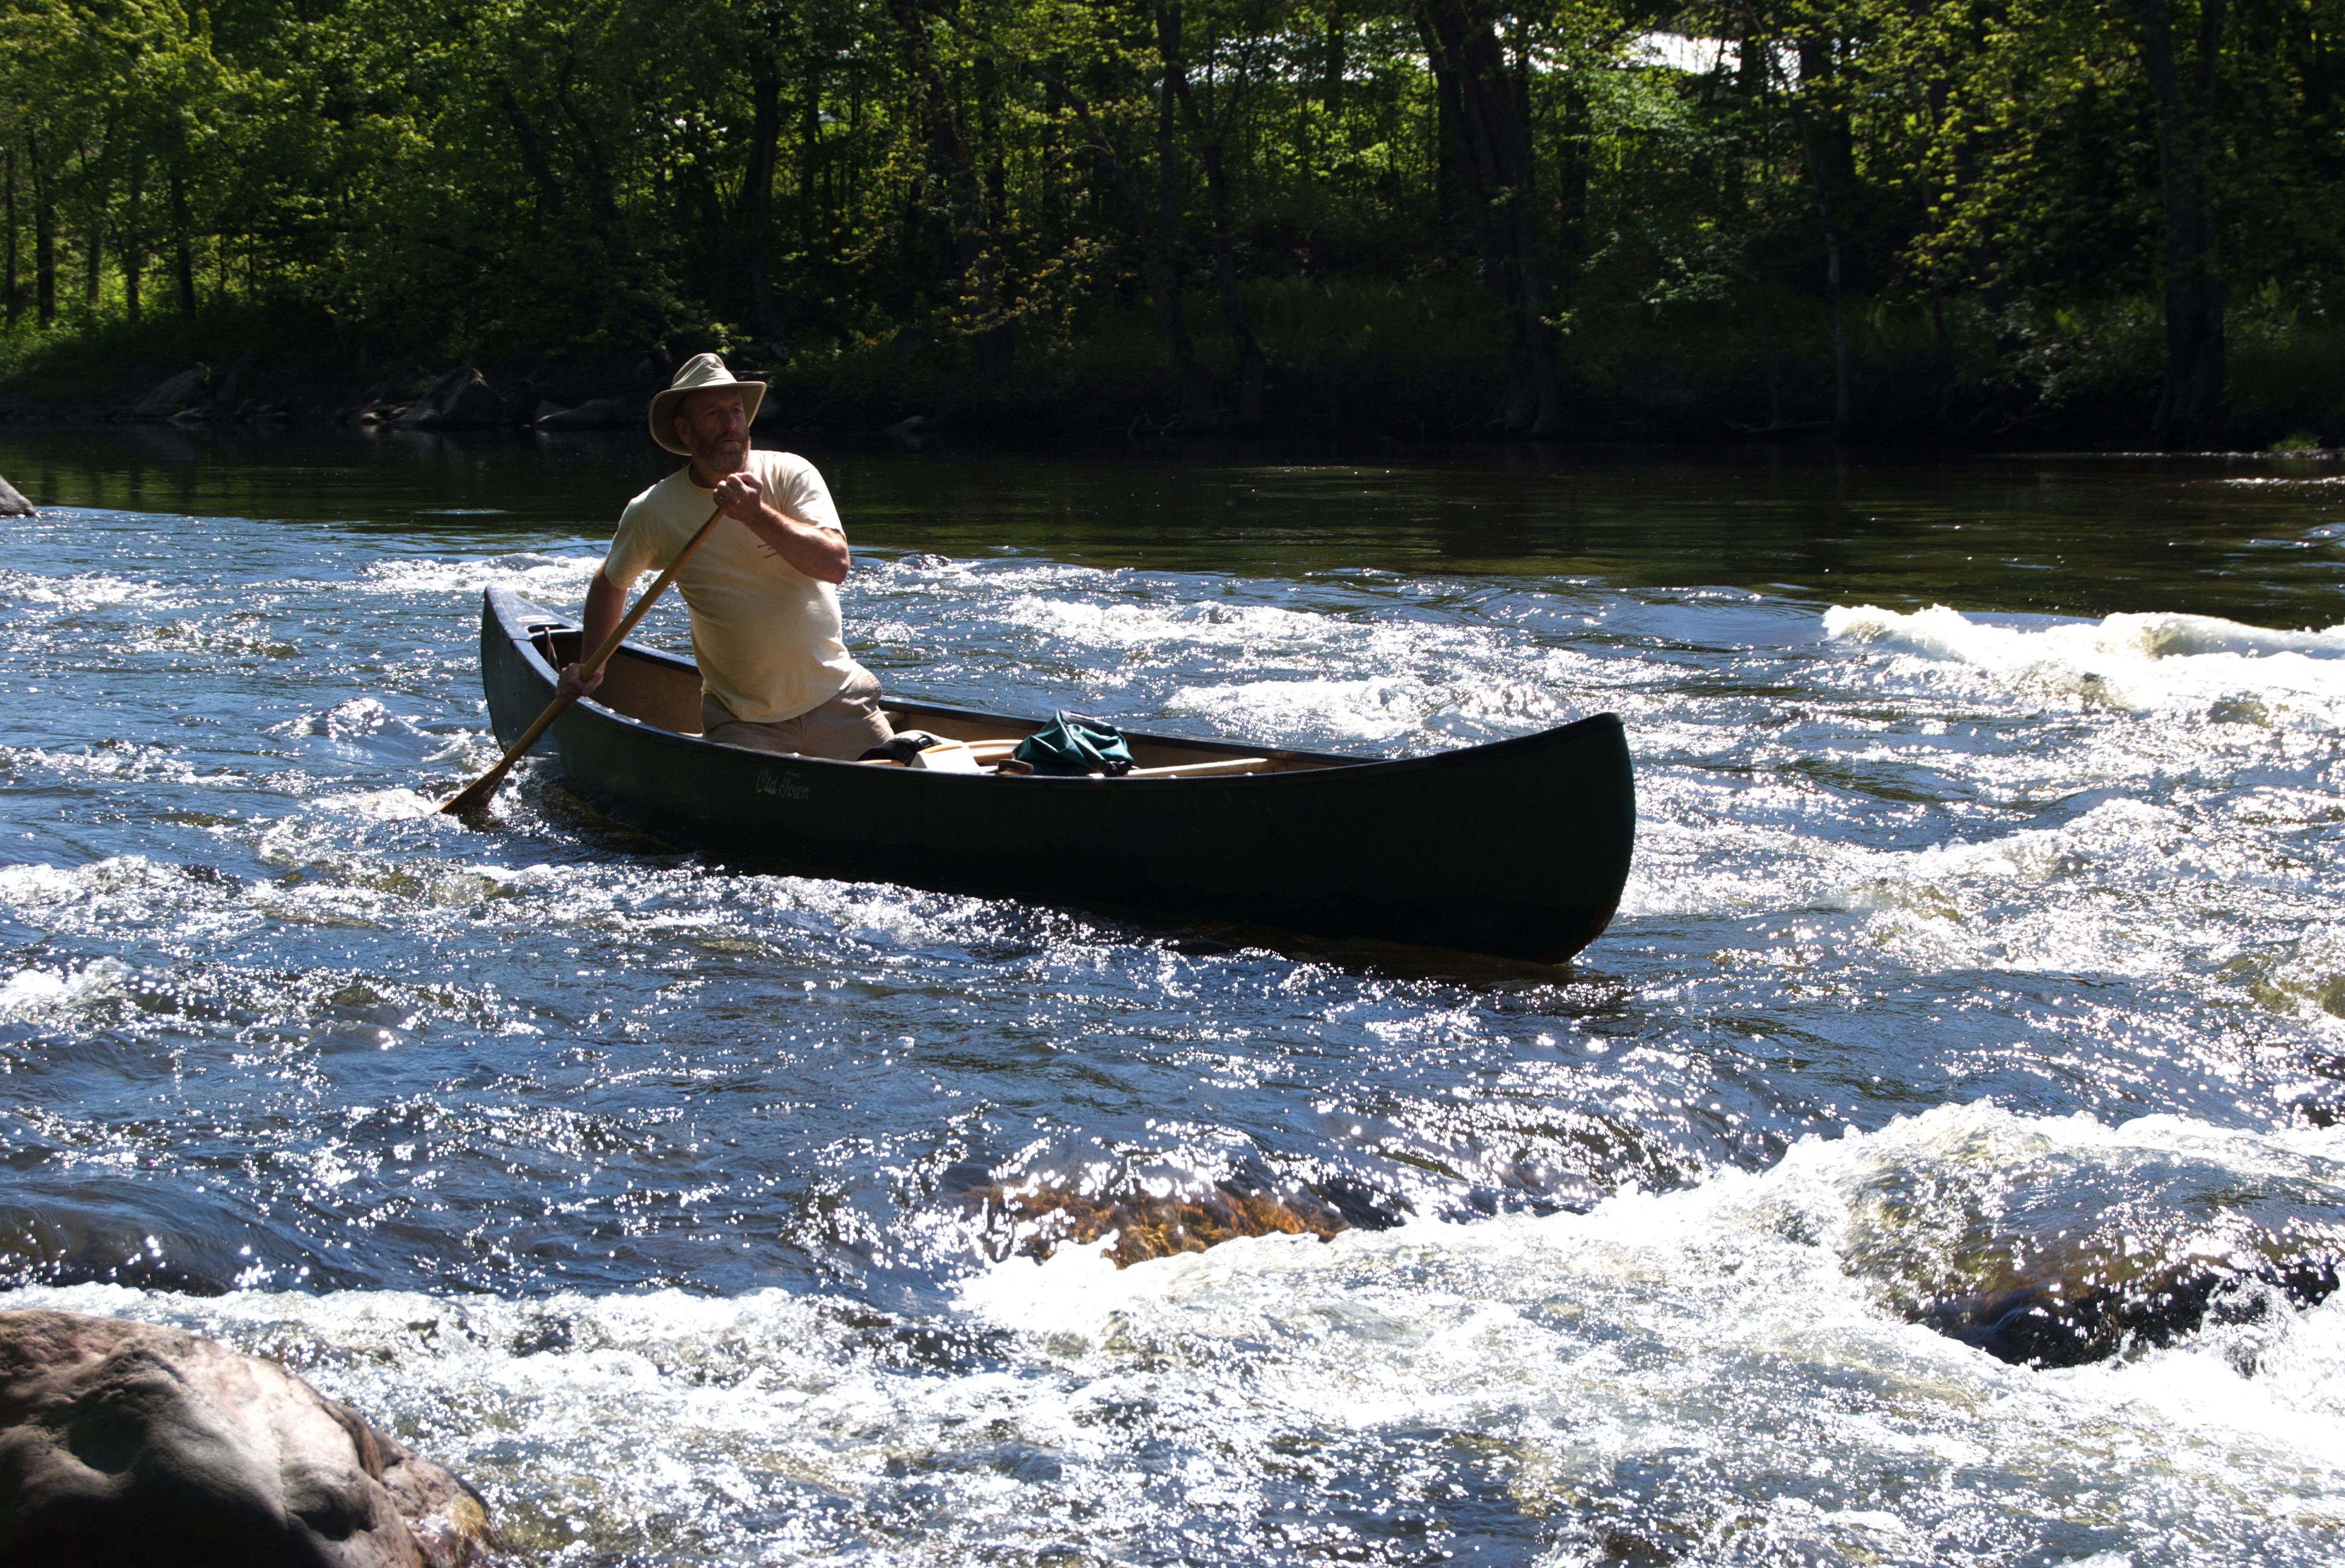 A man is canoeing down rapids in the Missiquoi River, VT. Photo by Ken Secor